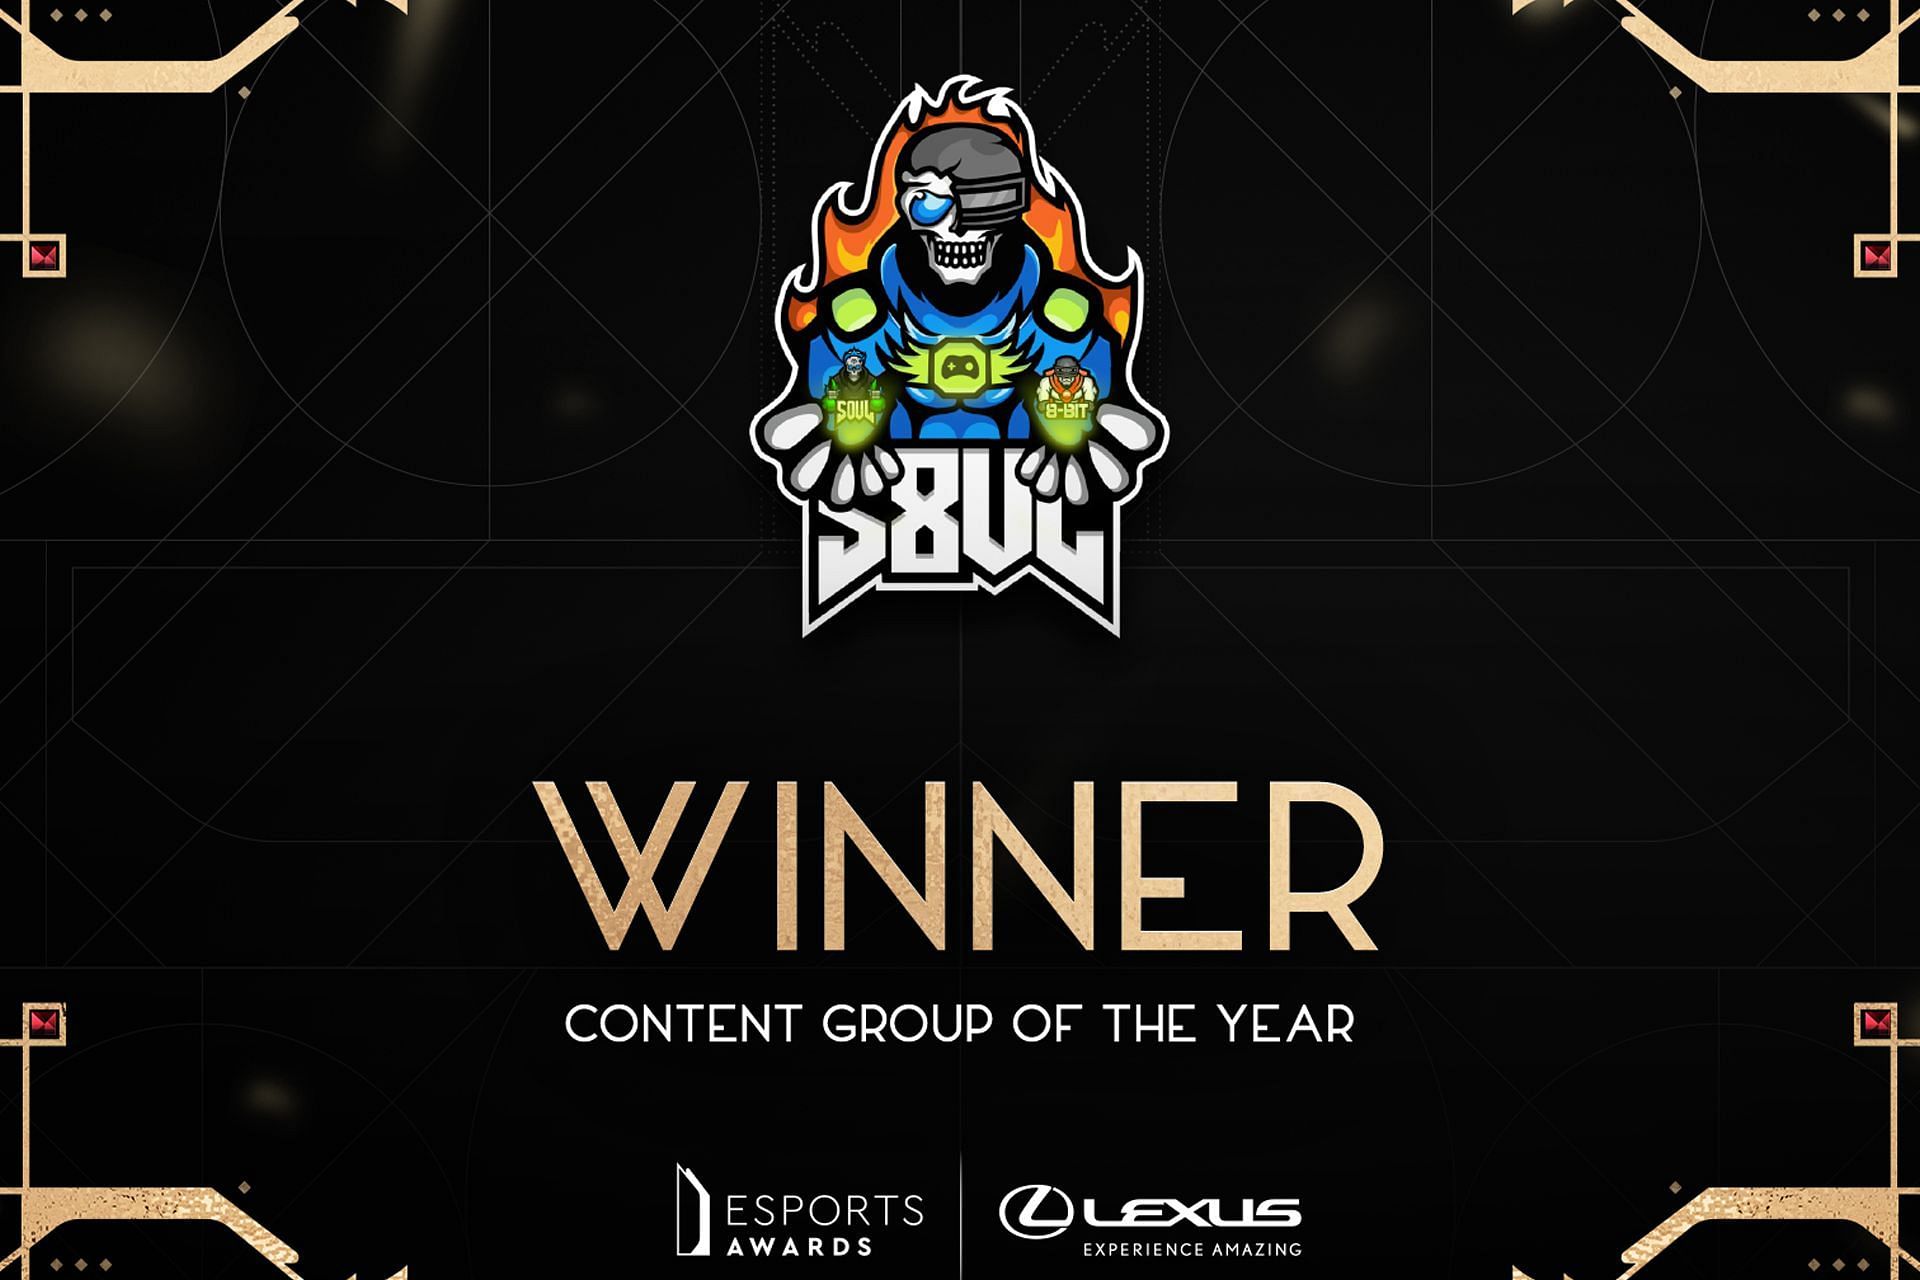 S8UL on X: Bagged the Fan Fav Esports Org of the Year at